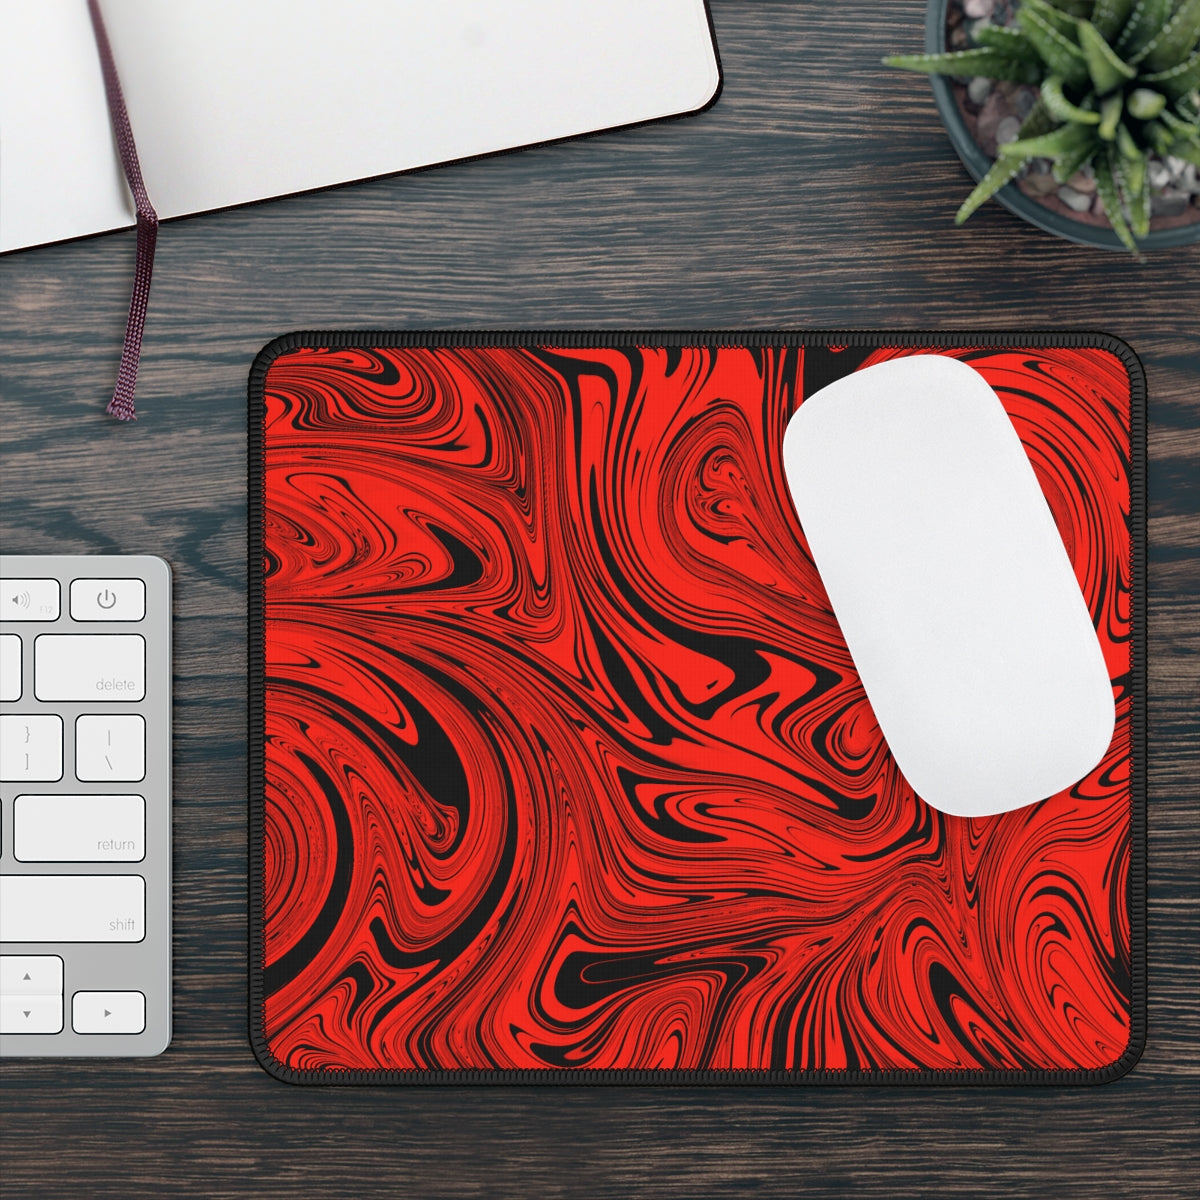 Black & Red Swirl Gaming Mouse Pad - Desk Cookies